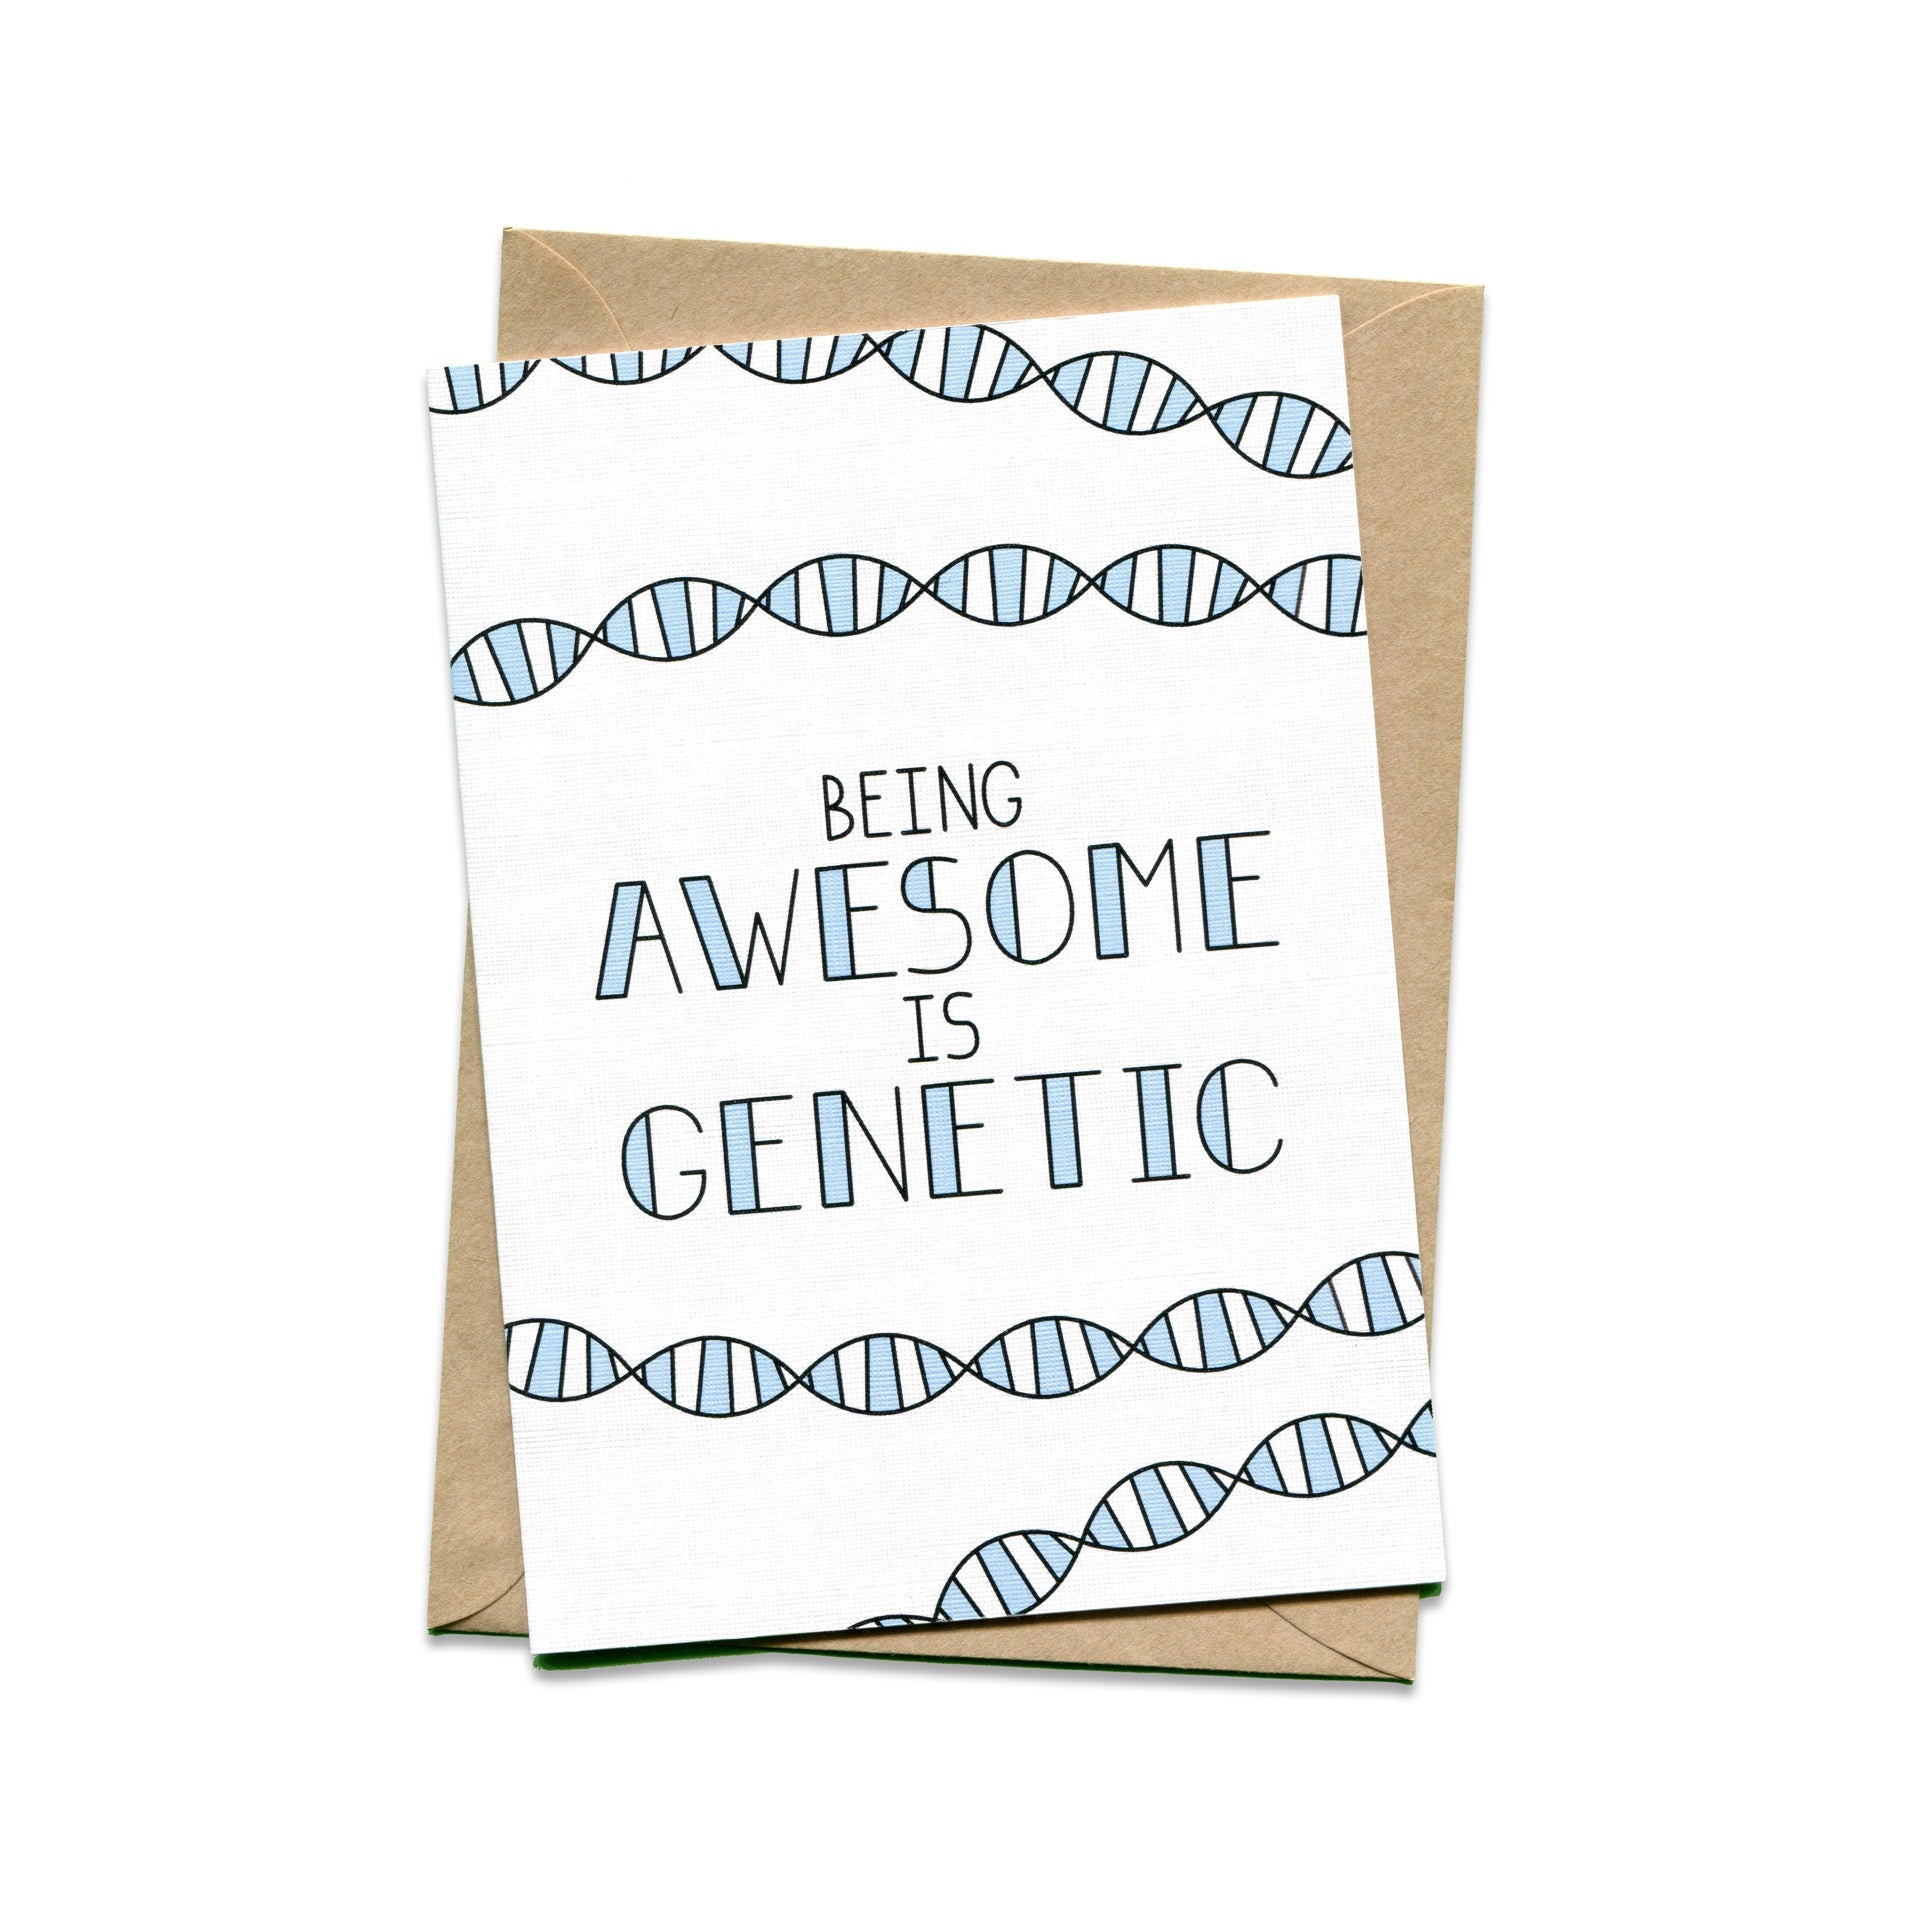 Being awesome is genetic